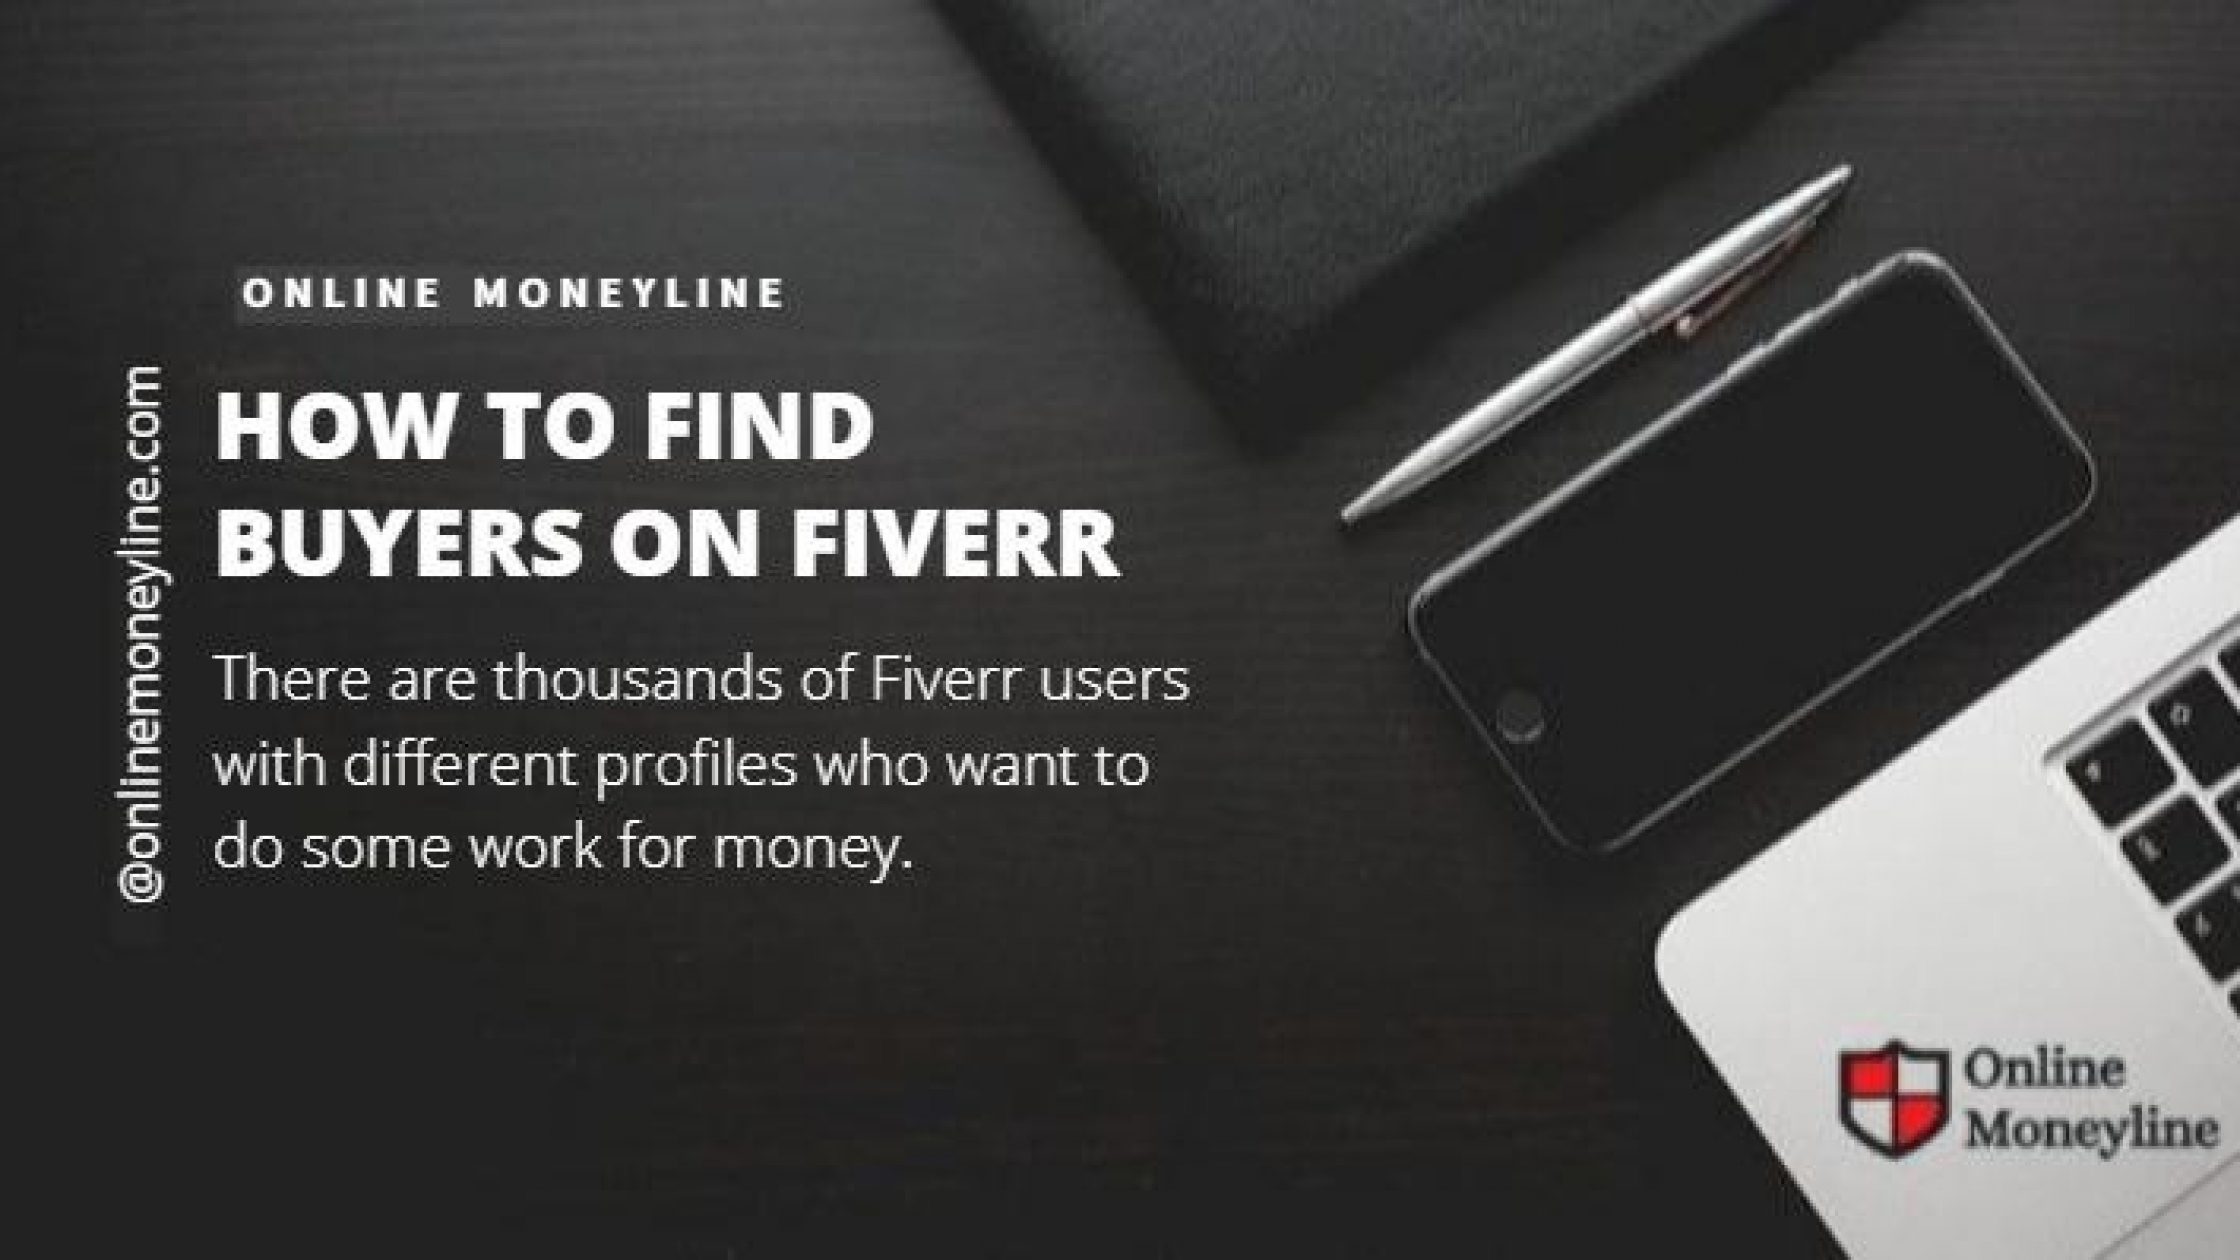 How To Find Buyers On Fiverr